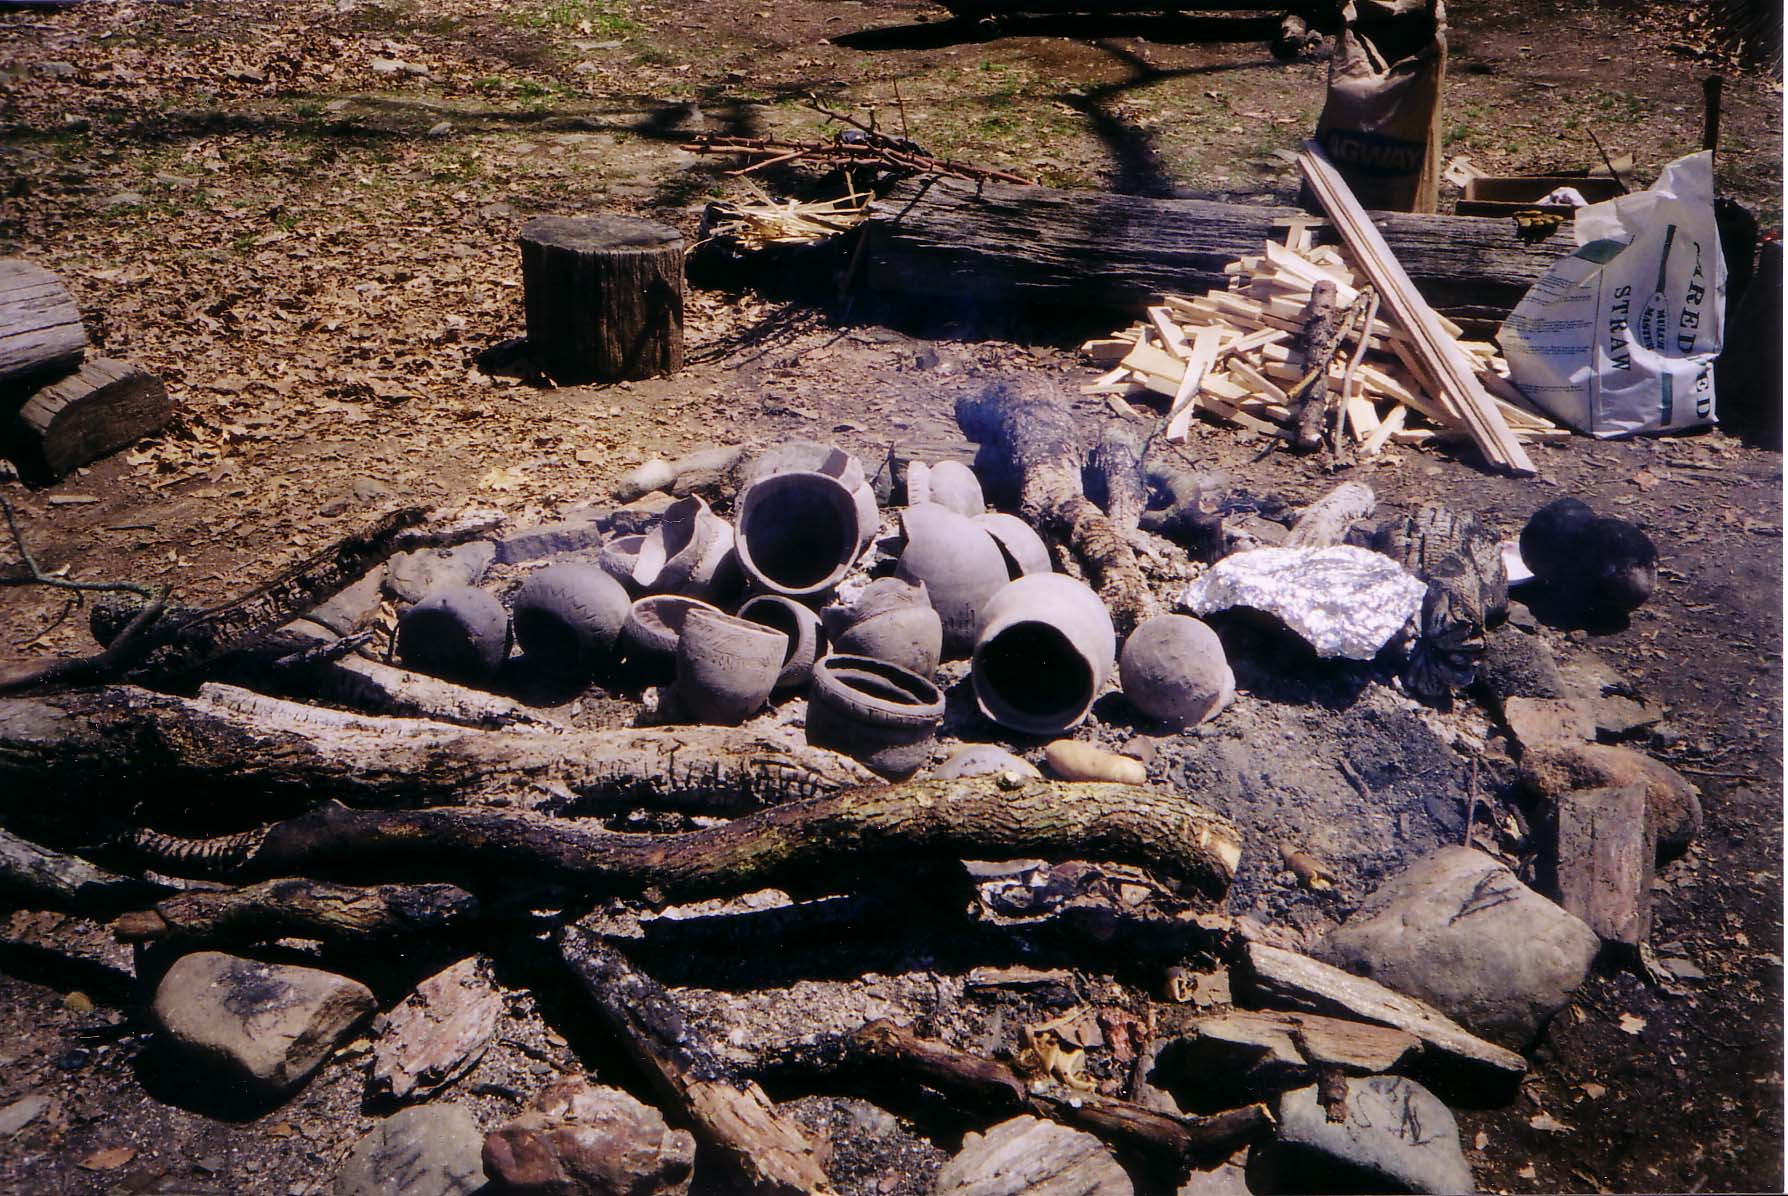 Image of pottery